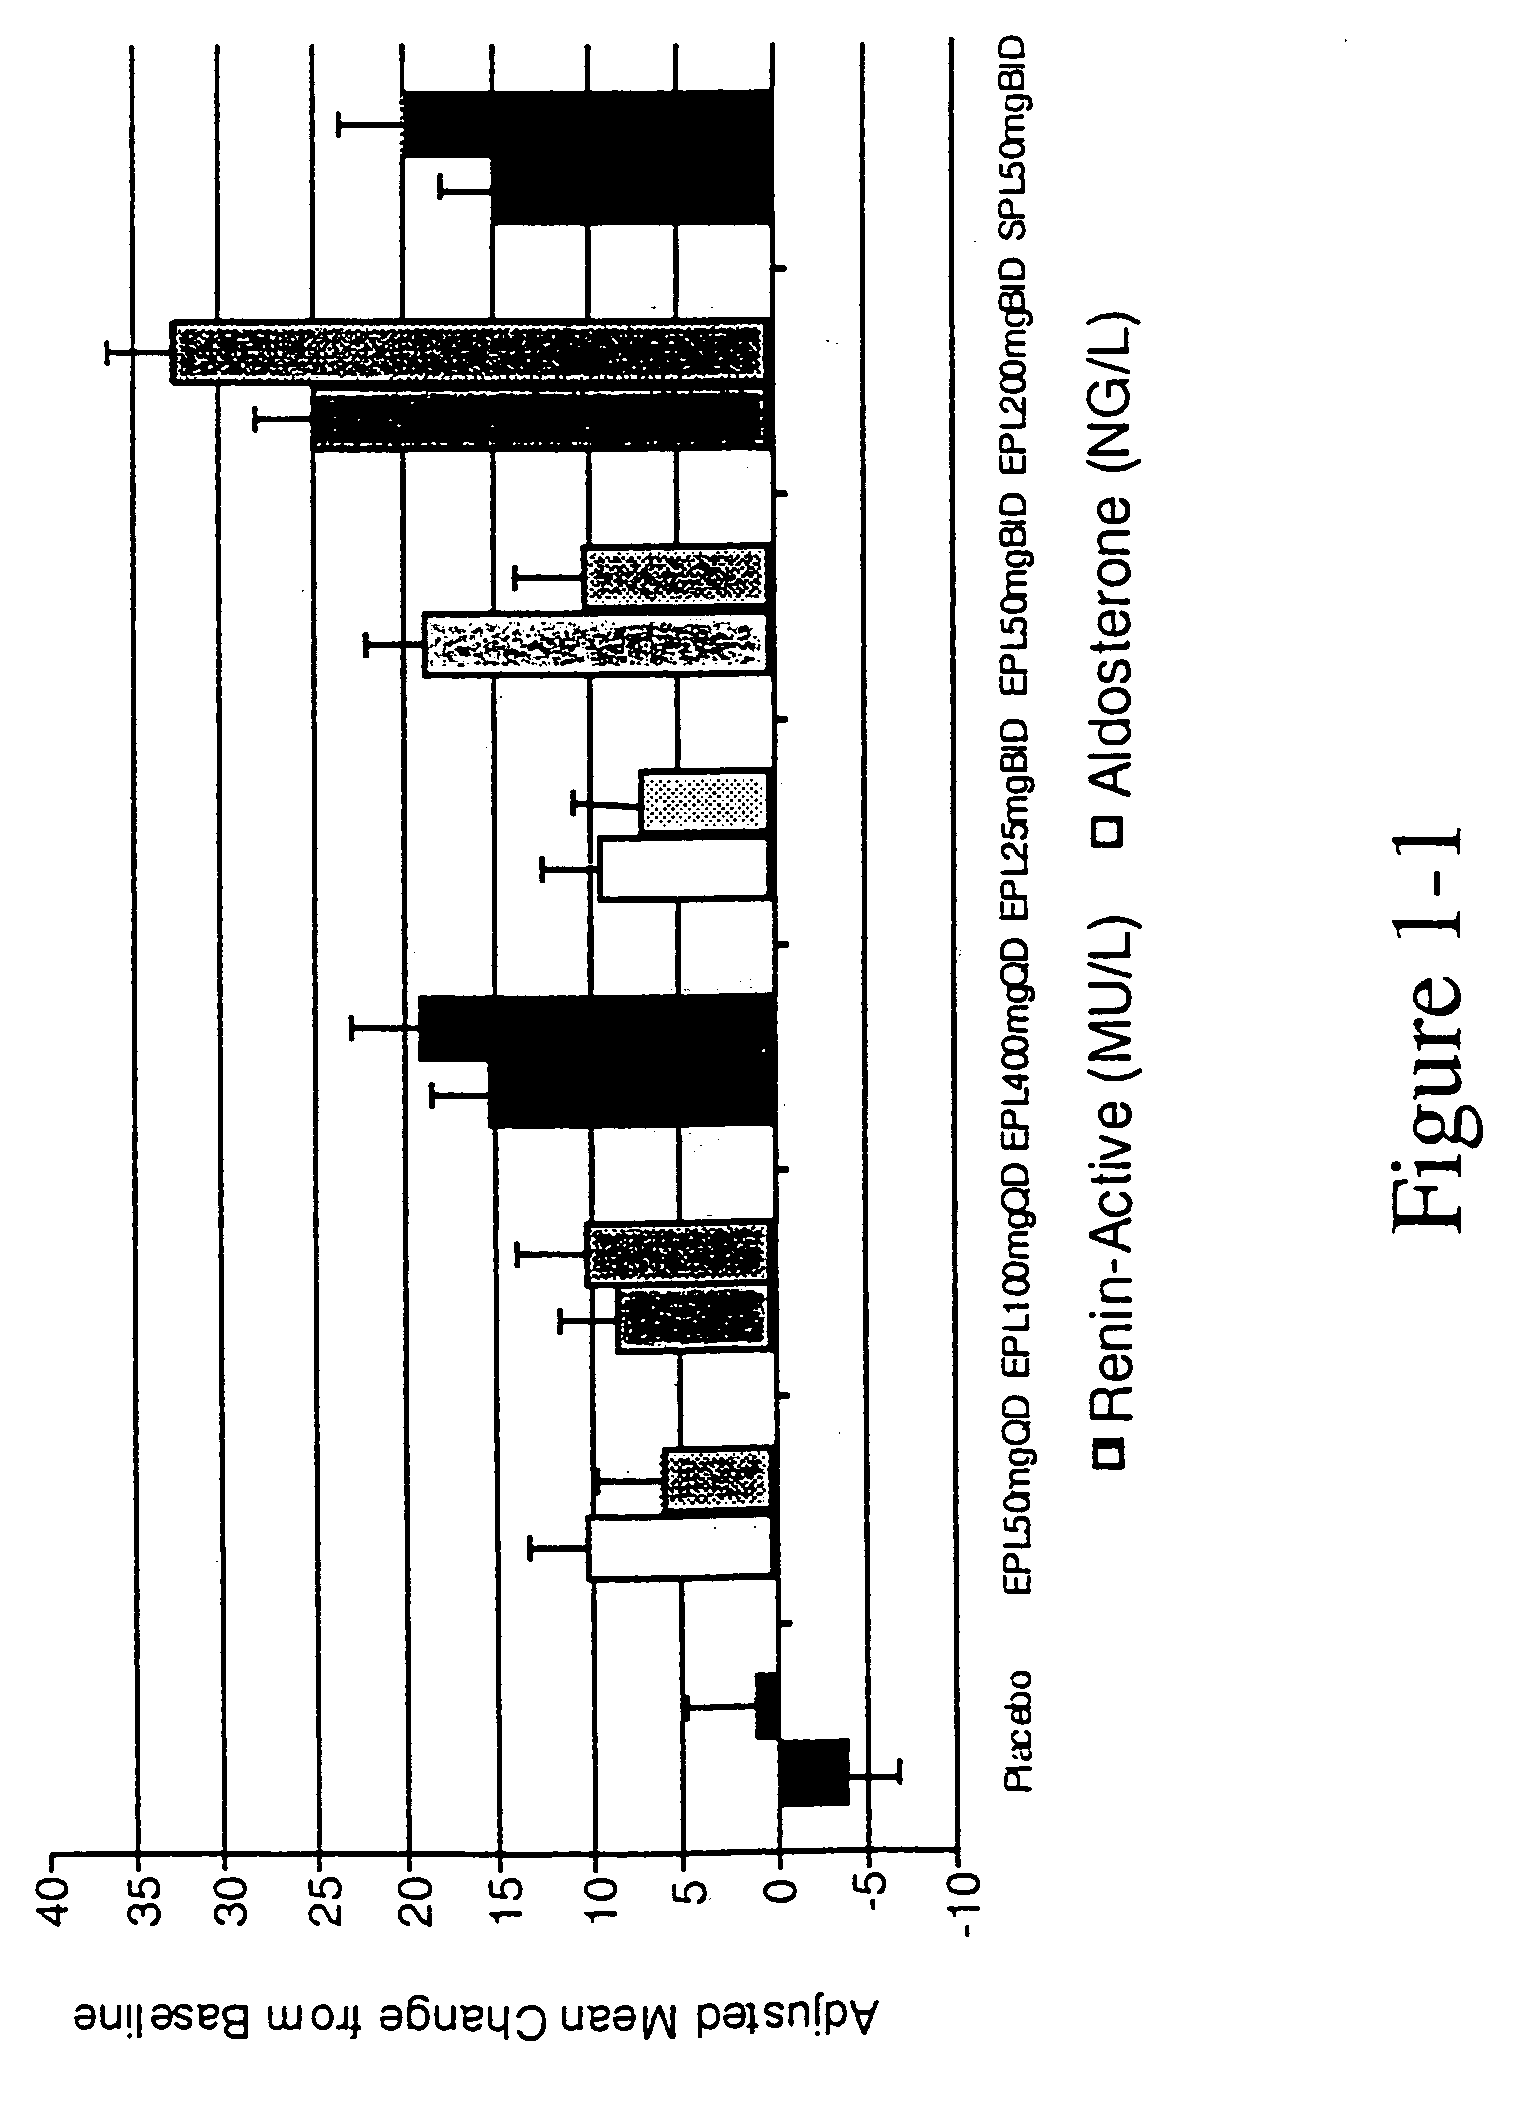 Use of an aldosterone receptor antagonist to improve cognitive function